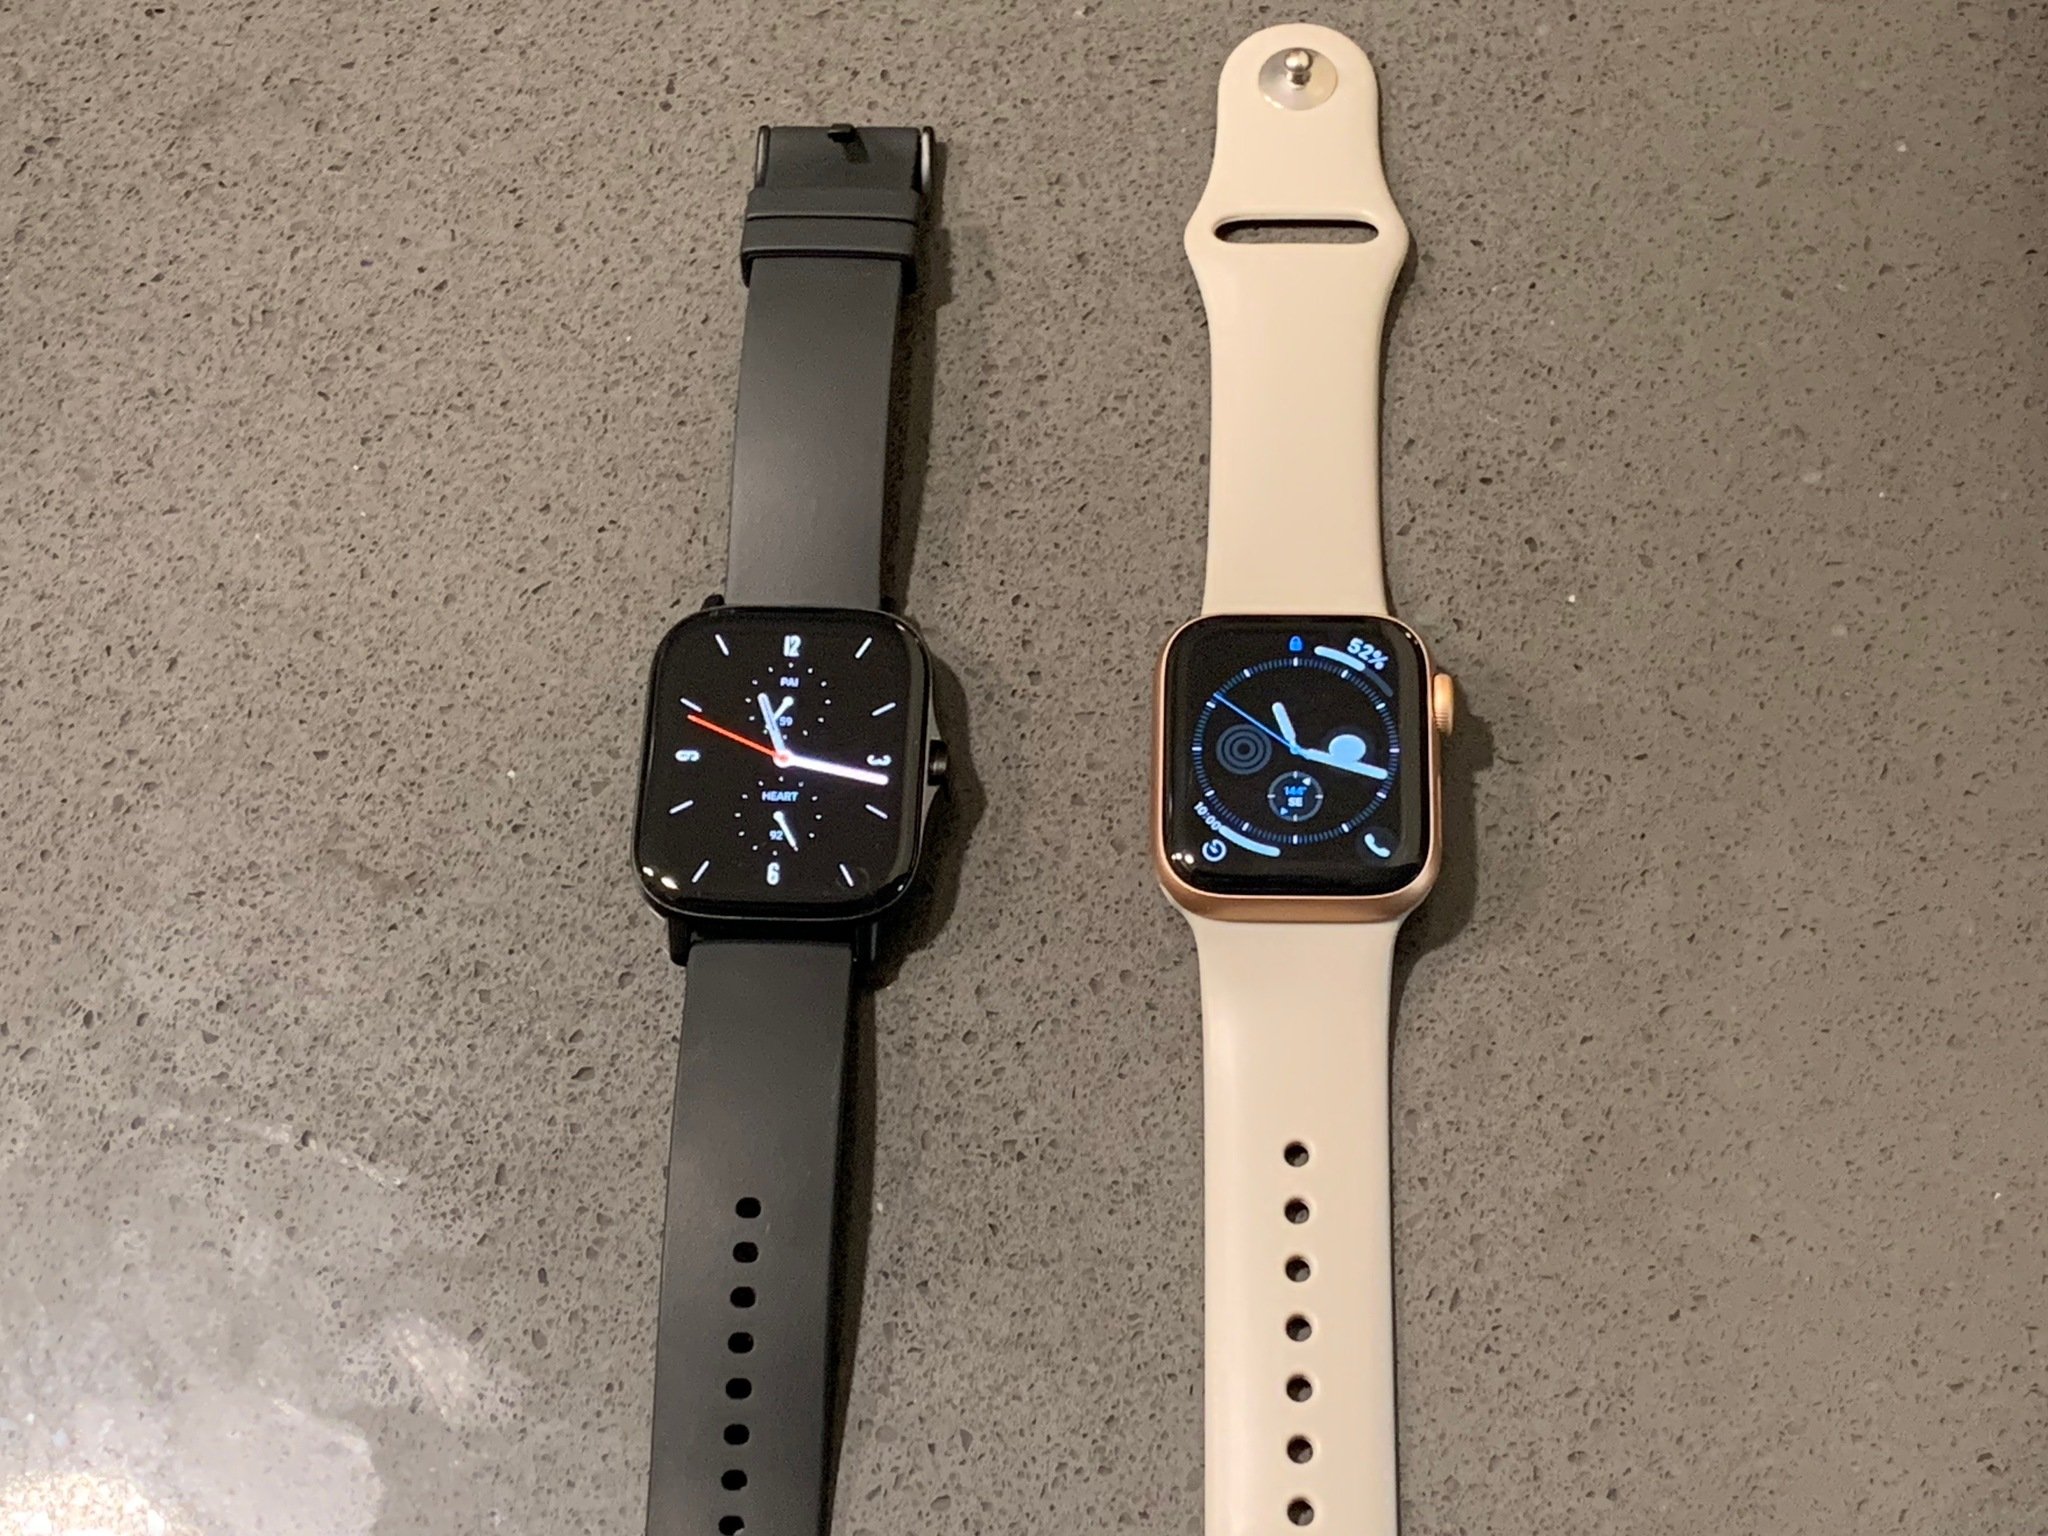 The AmazFit GTS 2 next to an Apple Watch